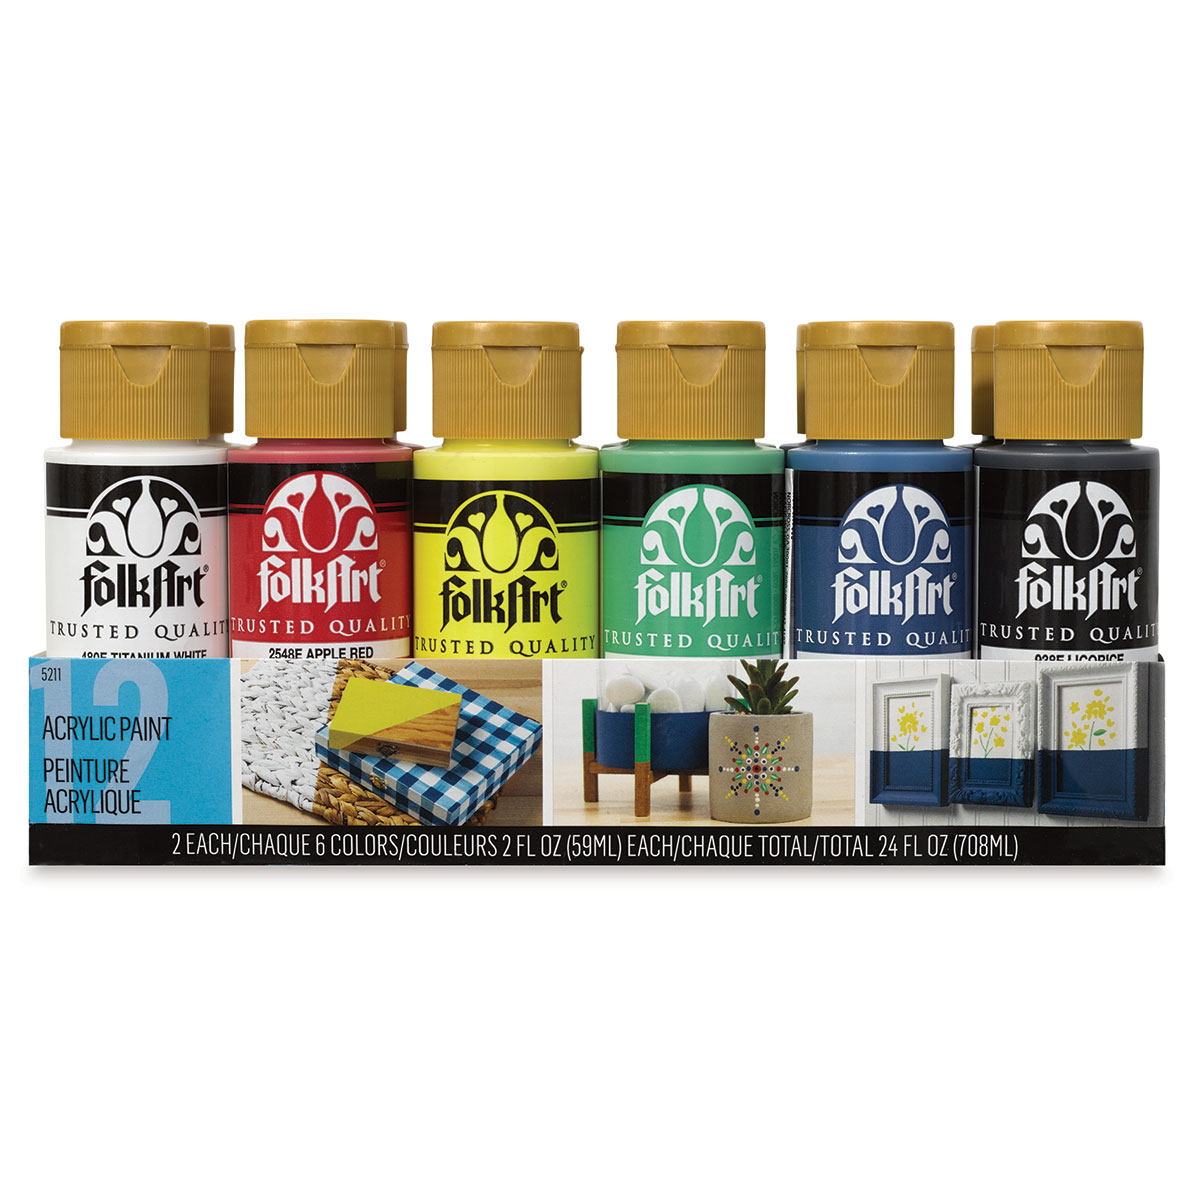 Test Report: PLAID FolkArt Acrylic Paint - 2021 – The Makers Resource Shop